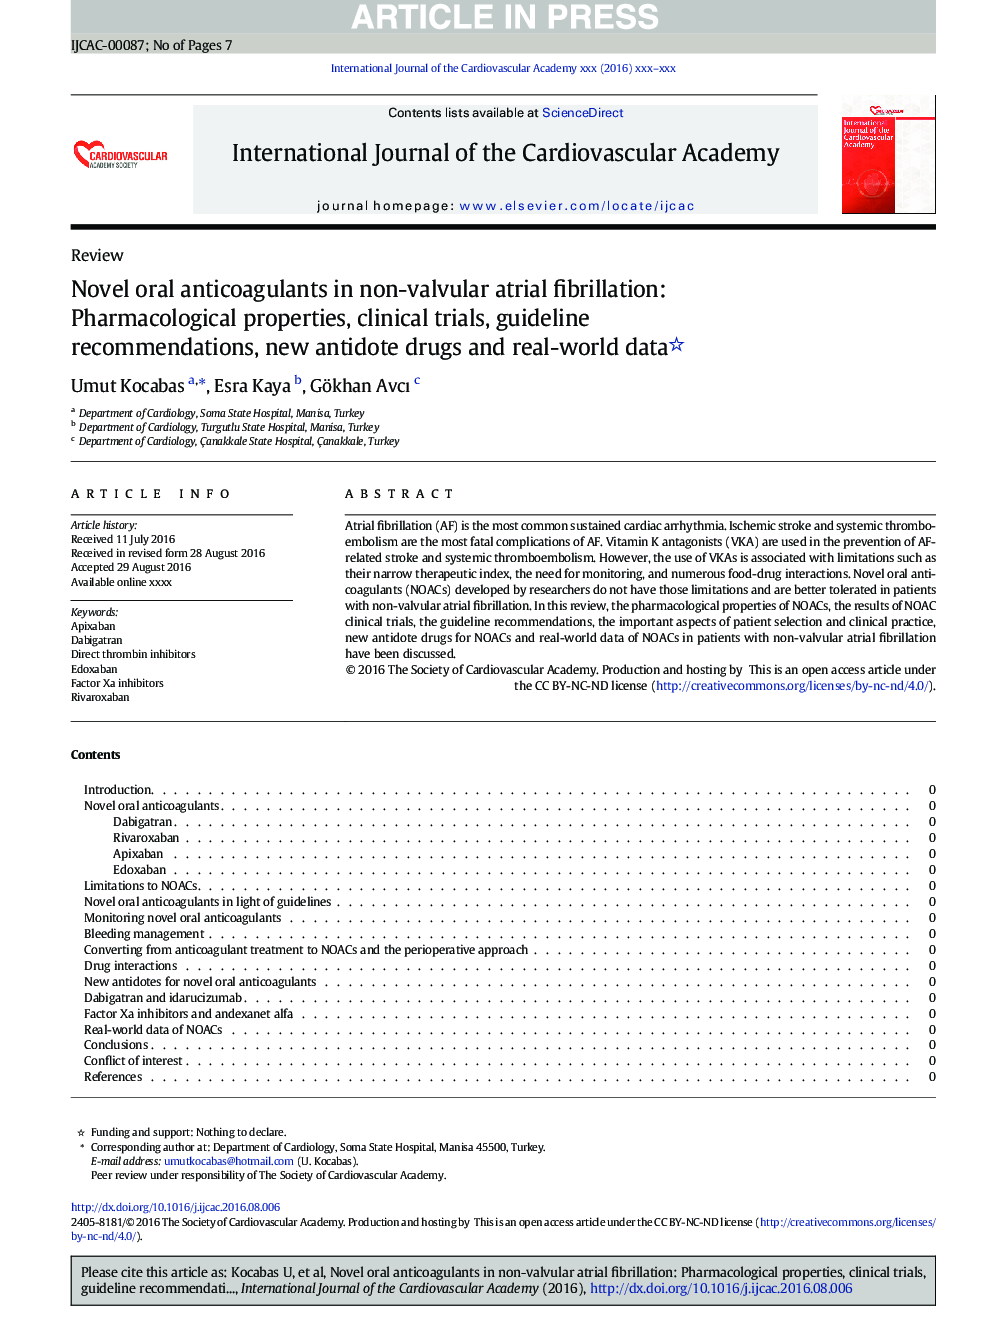 Novel oral anticoagulants in non-valvular atrial fibrillation: Pharmacological properties, clinical trials, guideline recommendations, new antidote drugs and real-world data